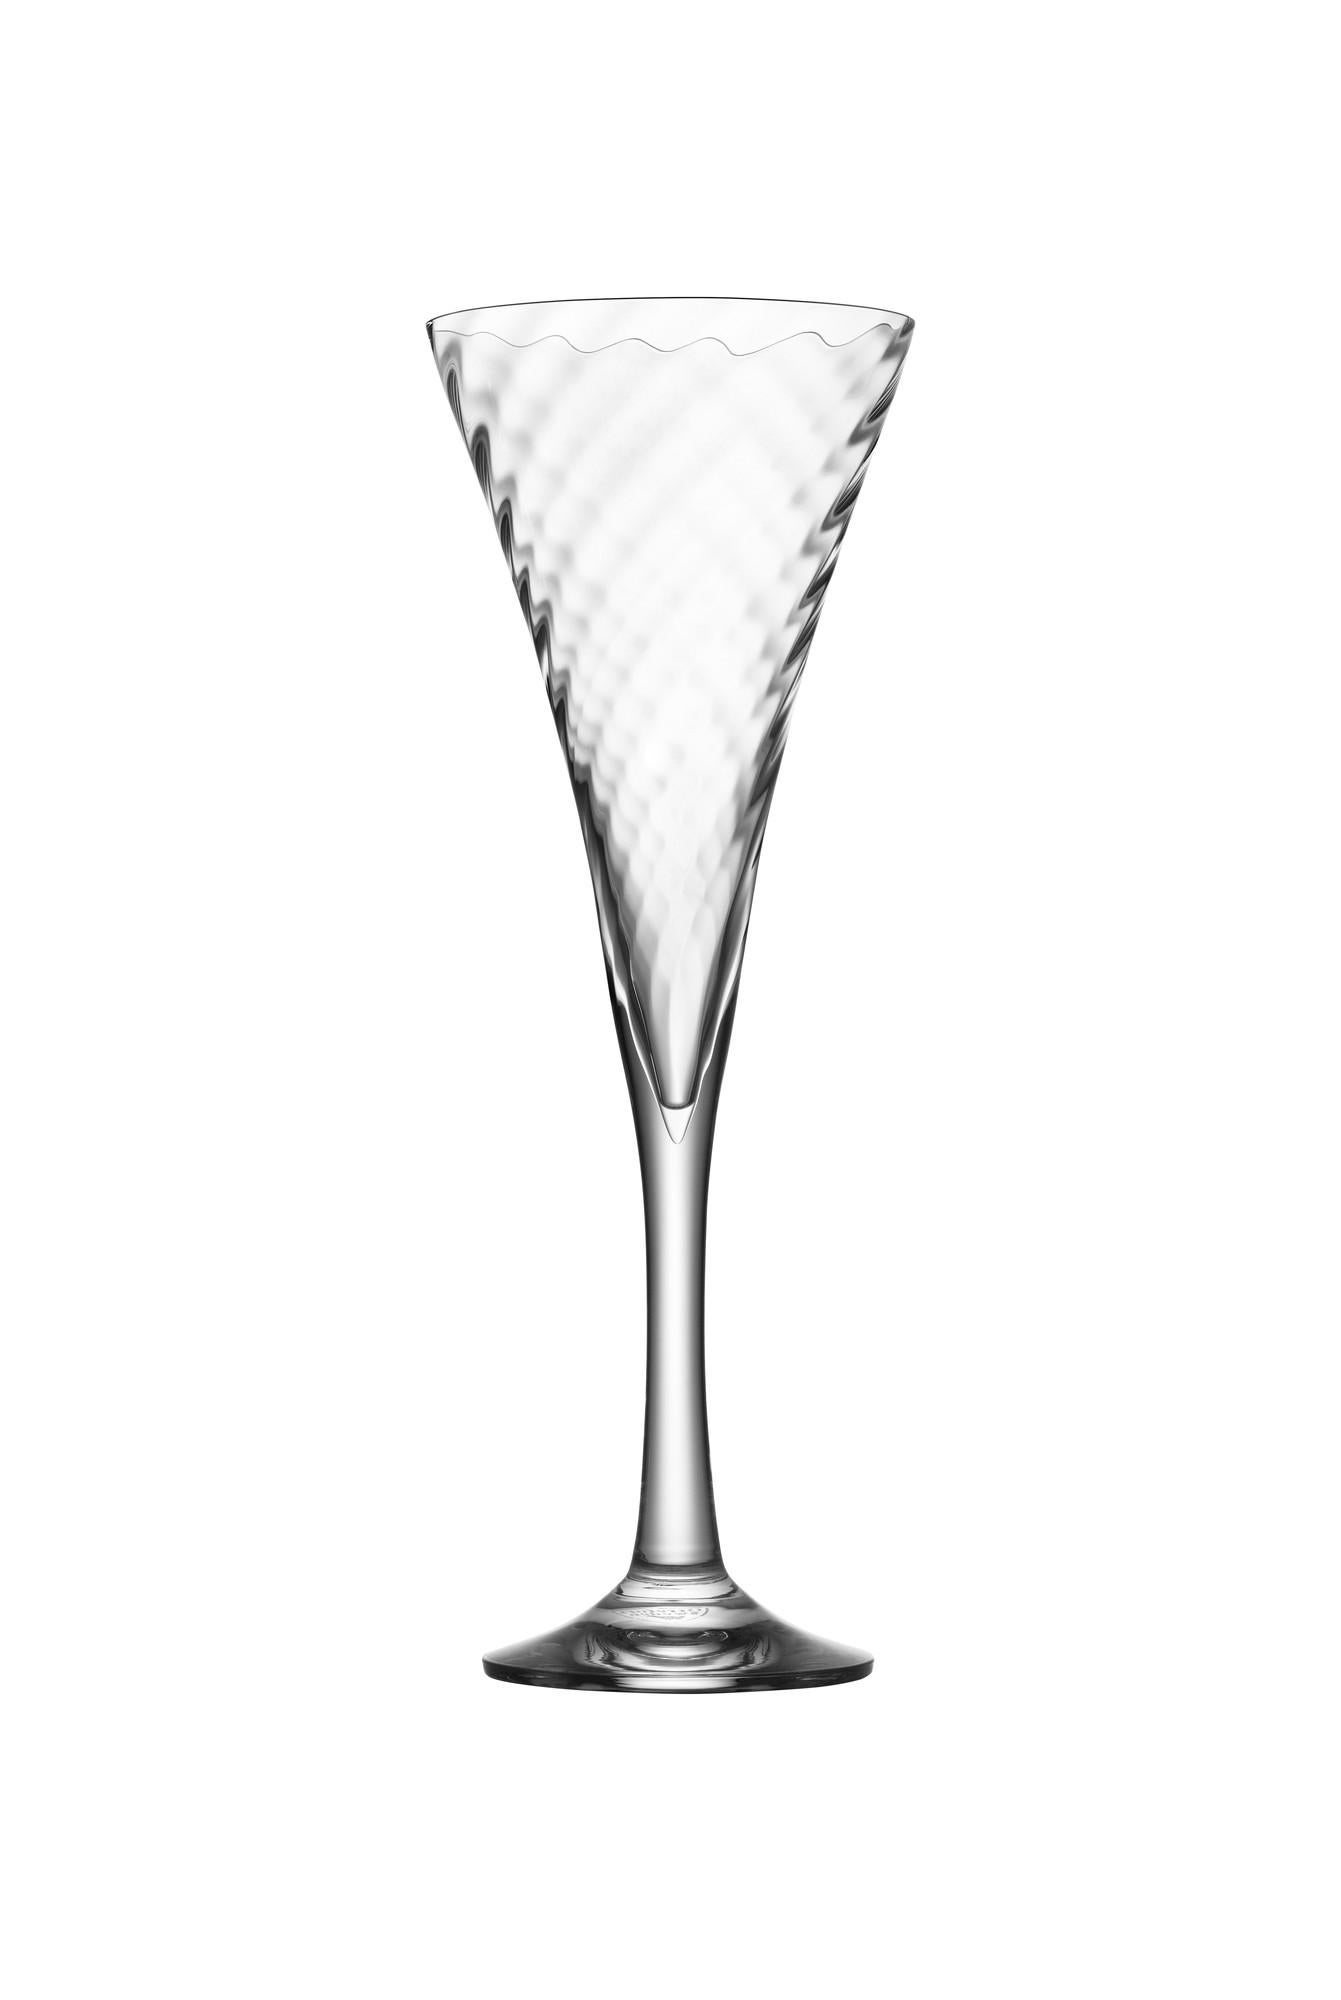 Helena Champagne holds 8.5 oz and has been part of the Orrefors assortment since 1977. The glass has a trumpet-shaped bowl covered in a subtle motif of diagonal lines, which create a beautiful optical effect in the crystal. Designed by Gunnar Cyrén.
